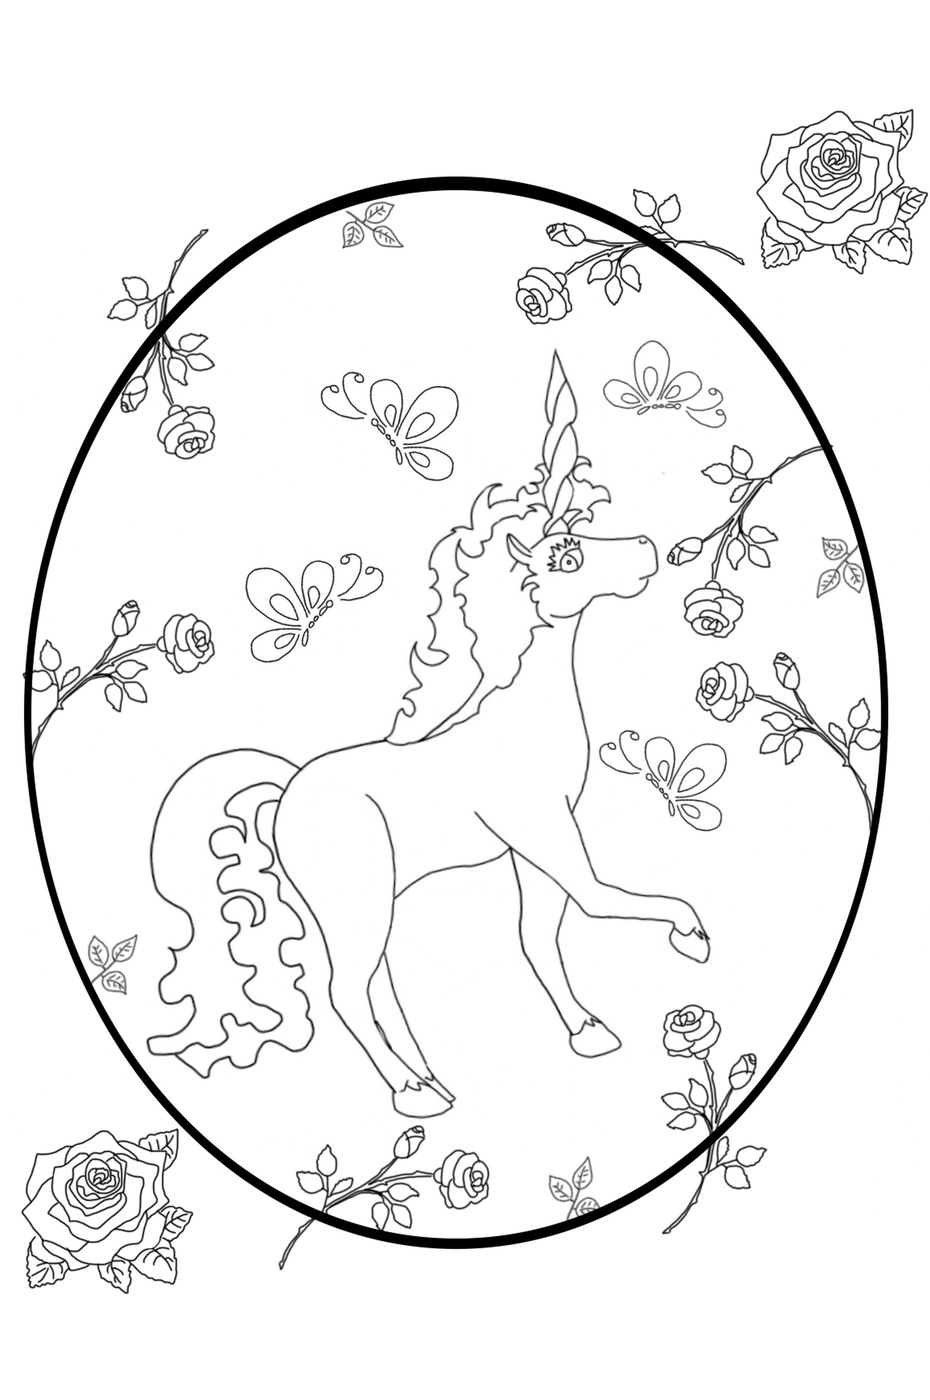 Unicorn and Roses Coloring Page